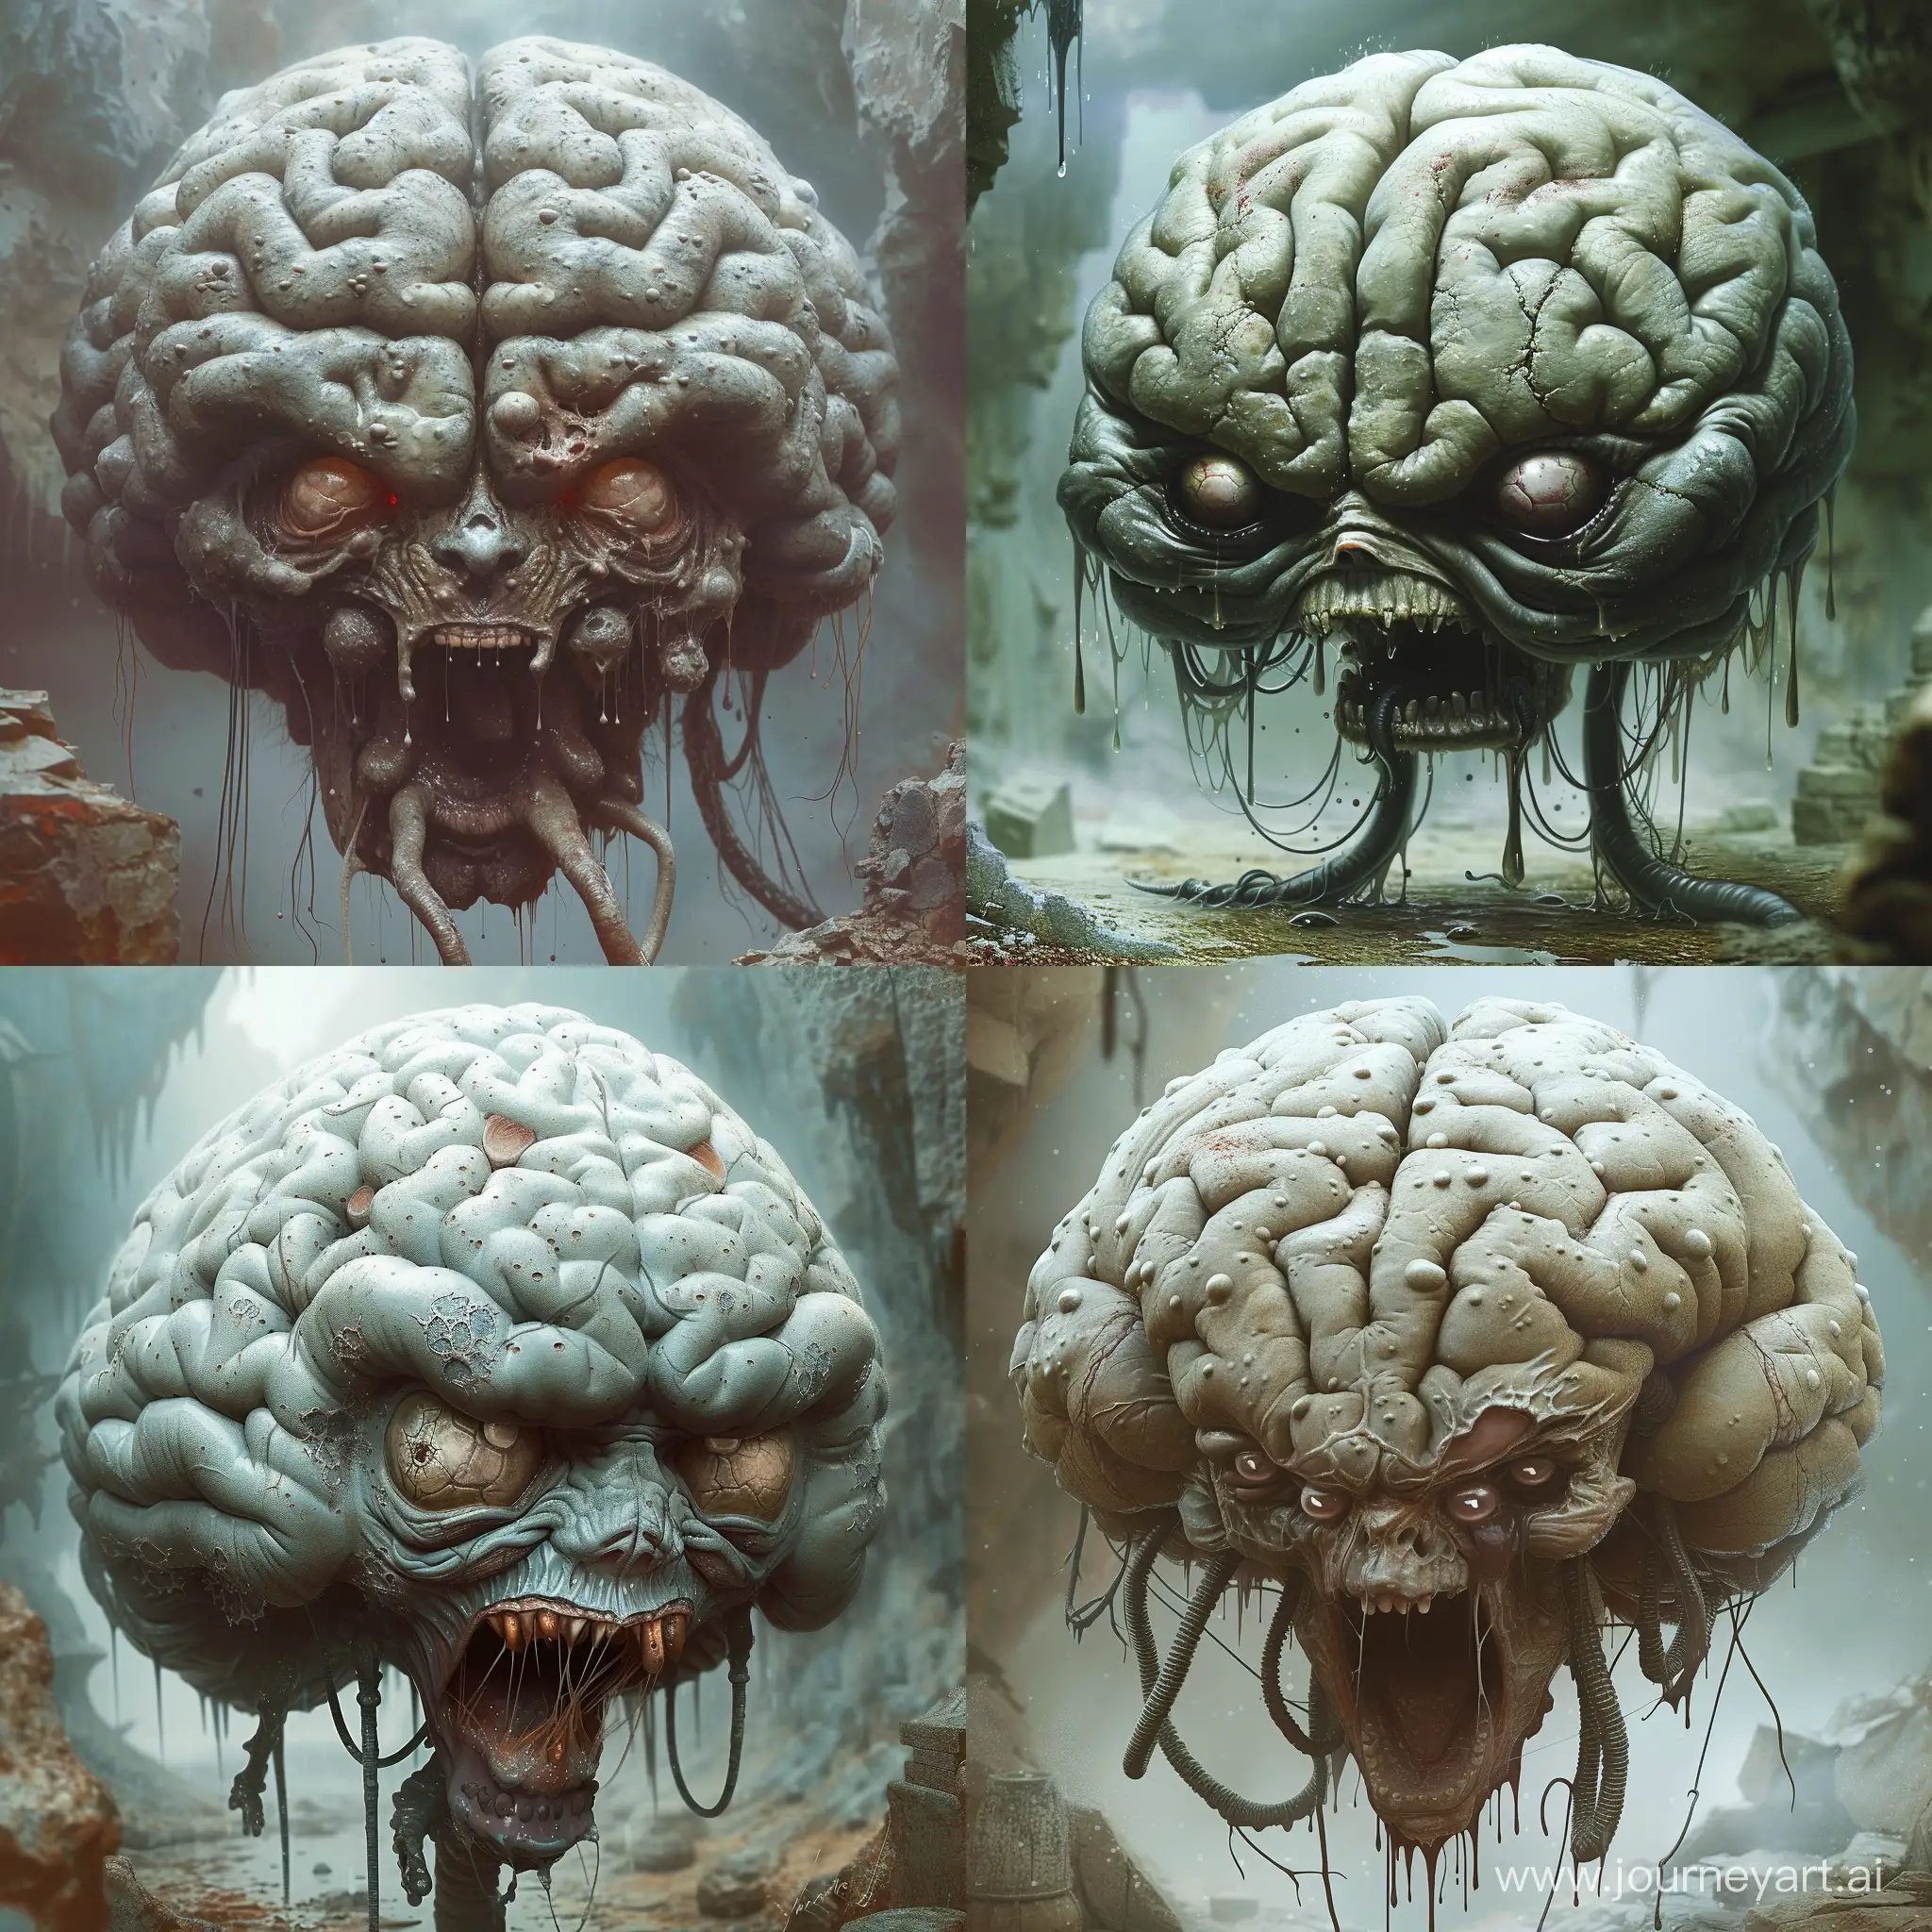 a grotesque and highly detailed fantasy or horror creature. It appears to be a monstrous version of a brain-like entity with several anatomical and otherworldly characteristics:

The creature's head is oversized and reminiscent of a human brain, with many folds and textures that suggest grey matter.
The surface of the "brain" also has numerous pustule-like structures, which give it an unsettling, diseased appearance.
The entity has two eyes that are glaring forward. These eyes have humanoid features but look bloodshot and ferocious.
Below the eyes, there's a wide, gaping mouth, lined with sharp, irregular teeth. The mouth is open as if the creature is growling or screaming.
Stringy, saliva-like strands are visible dripping from the mouth, adding to the visceral and disturbing character of the image.
Several tentacle-like appendages, resembling oversized brain convolutions or worms, extend from the base of the head, suggesting that the creature may move or manipulate objects with these.
The background is blurry, but it seems to be an environment with a cold and damp atmosphere, possibly a dungeon or cave, which complements the horror aesthetic of the creature.
Overall, the image is likely designed to create a visceral and unsettling effect, and could be concept art from a horror game, movie, or another piece of speculative fiction. The image is rich in texture and detail, emphasizing the grotesque and surreal nature of the creature it depicts.